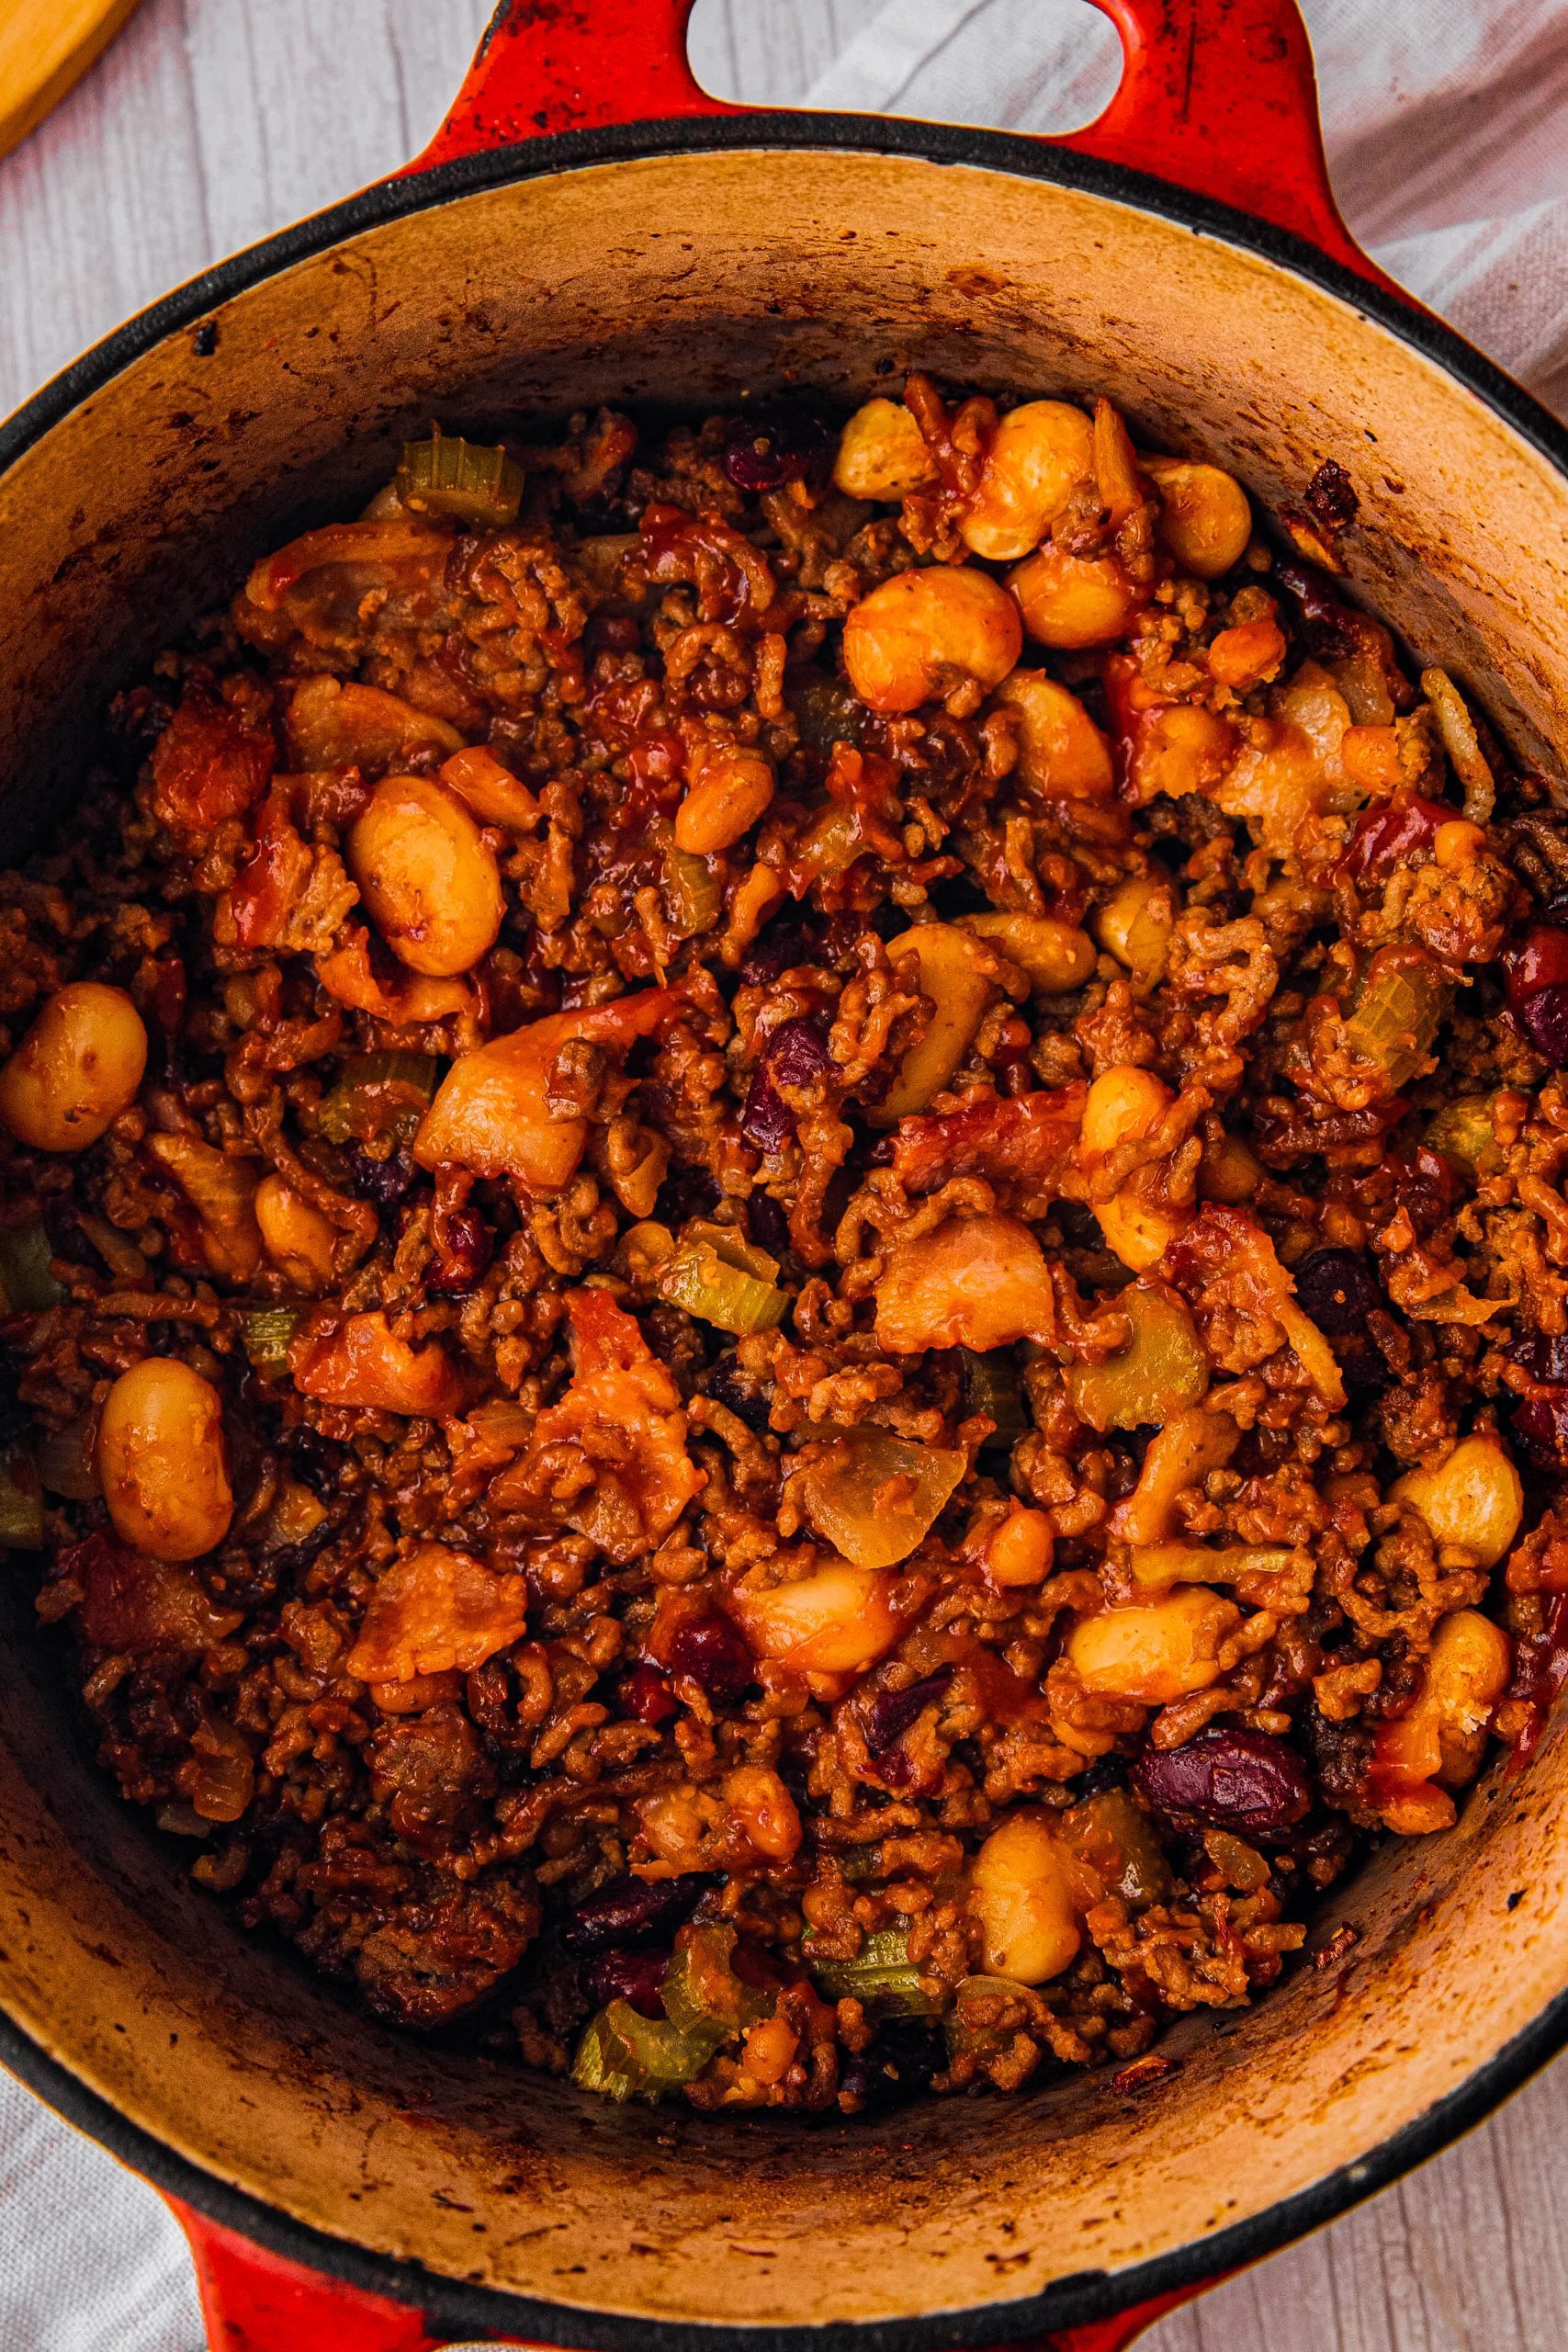 Your Calico Bean Casserole is ready to enjoy!